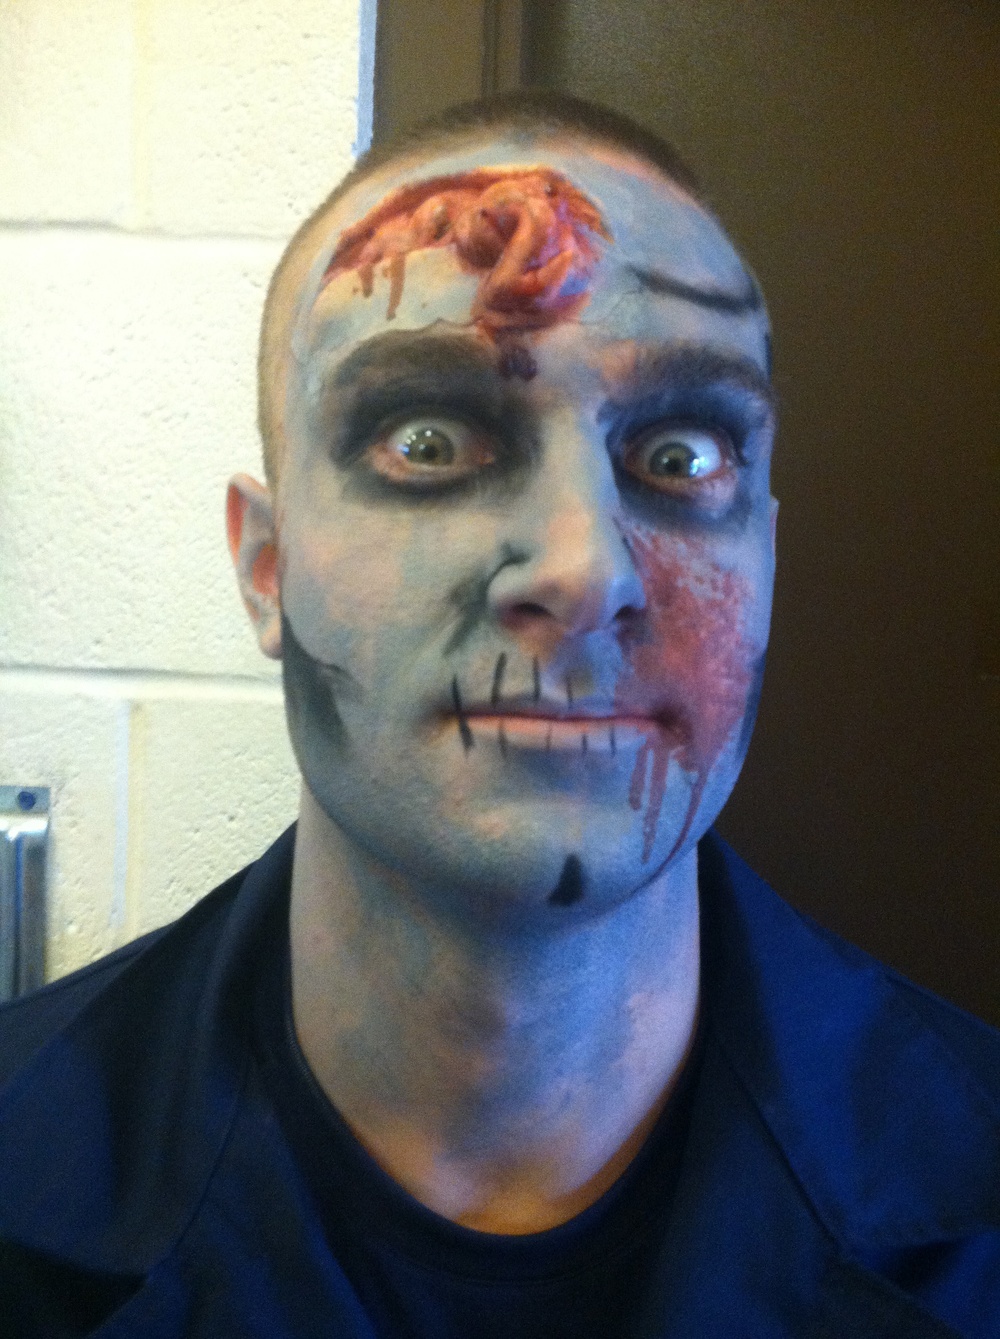 Station Marblehead goes zombie for canned food